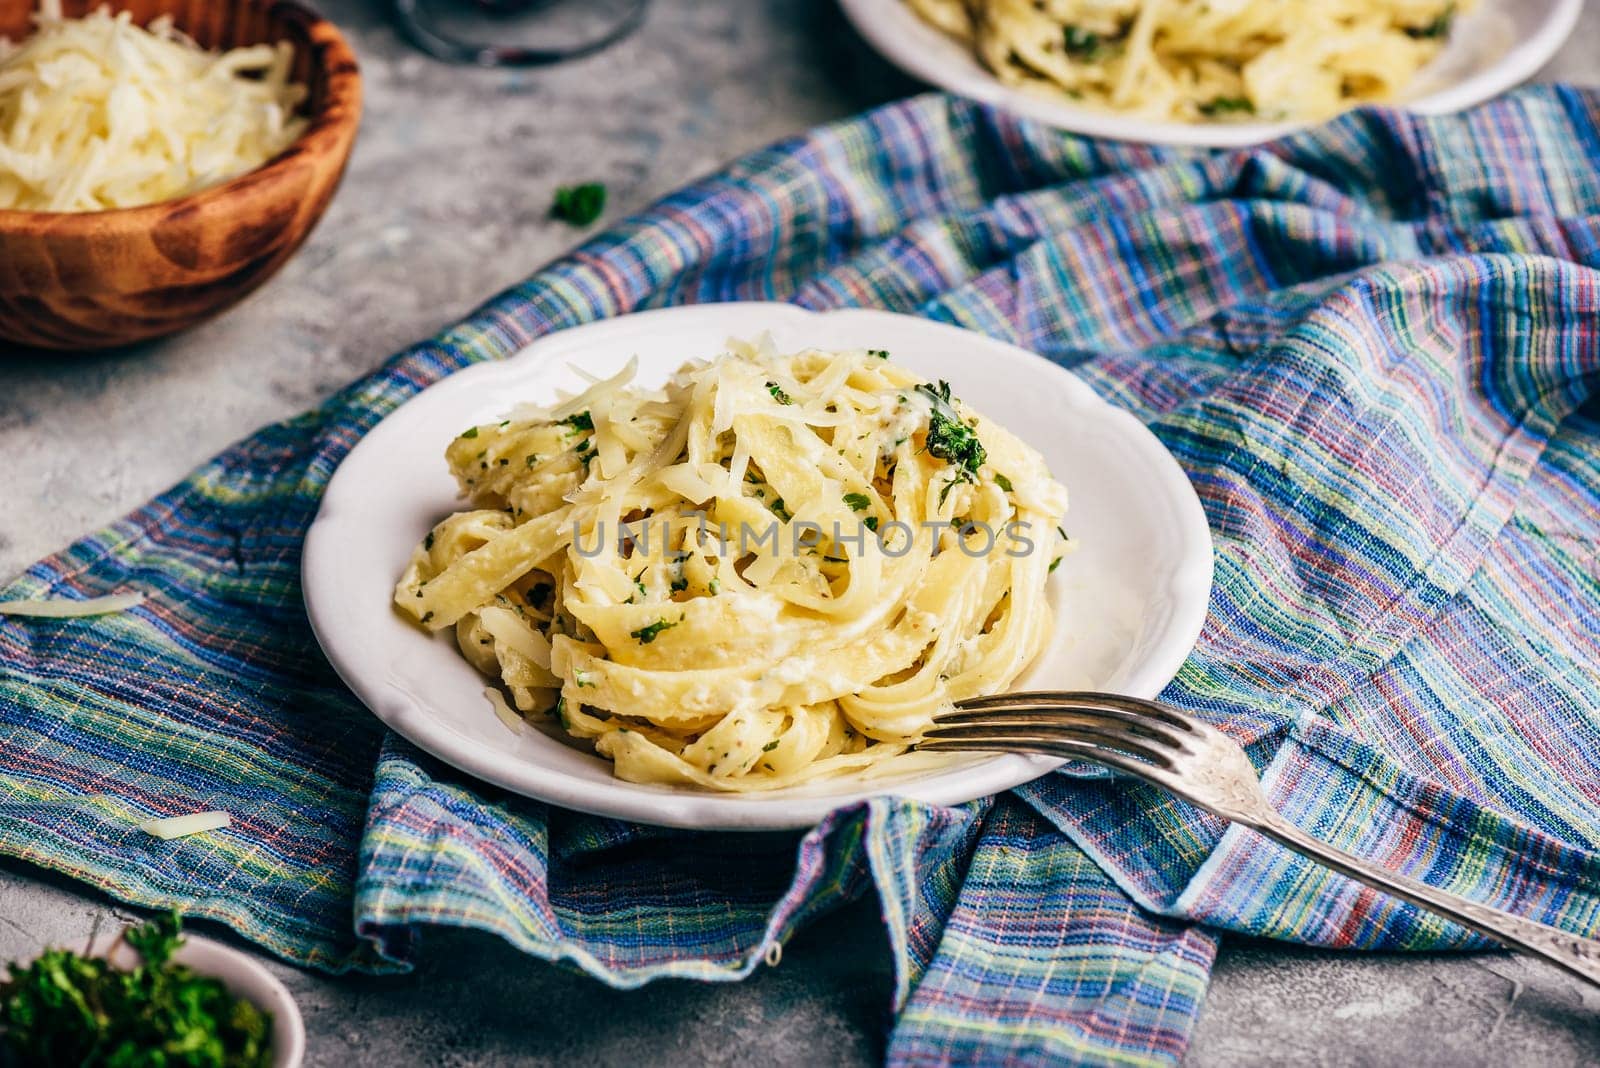 Portions of Homemade Pasta with Alfredo Sauce